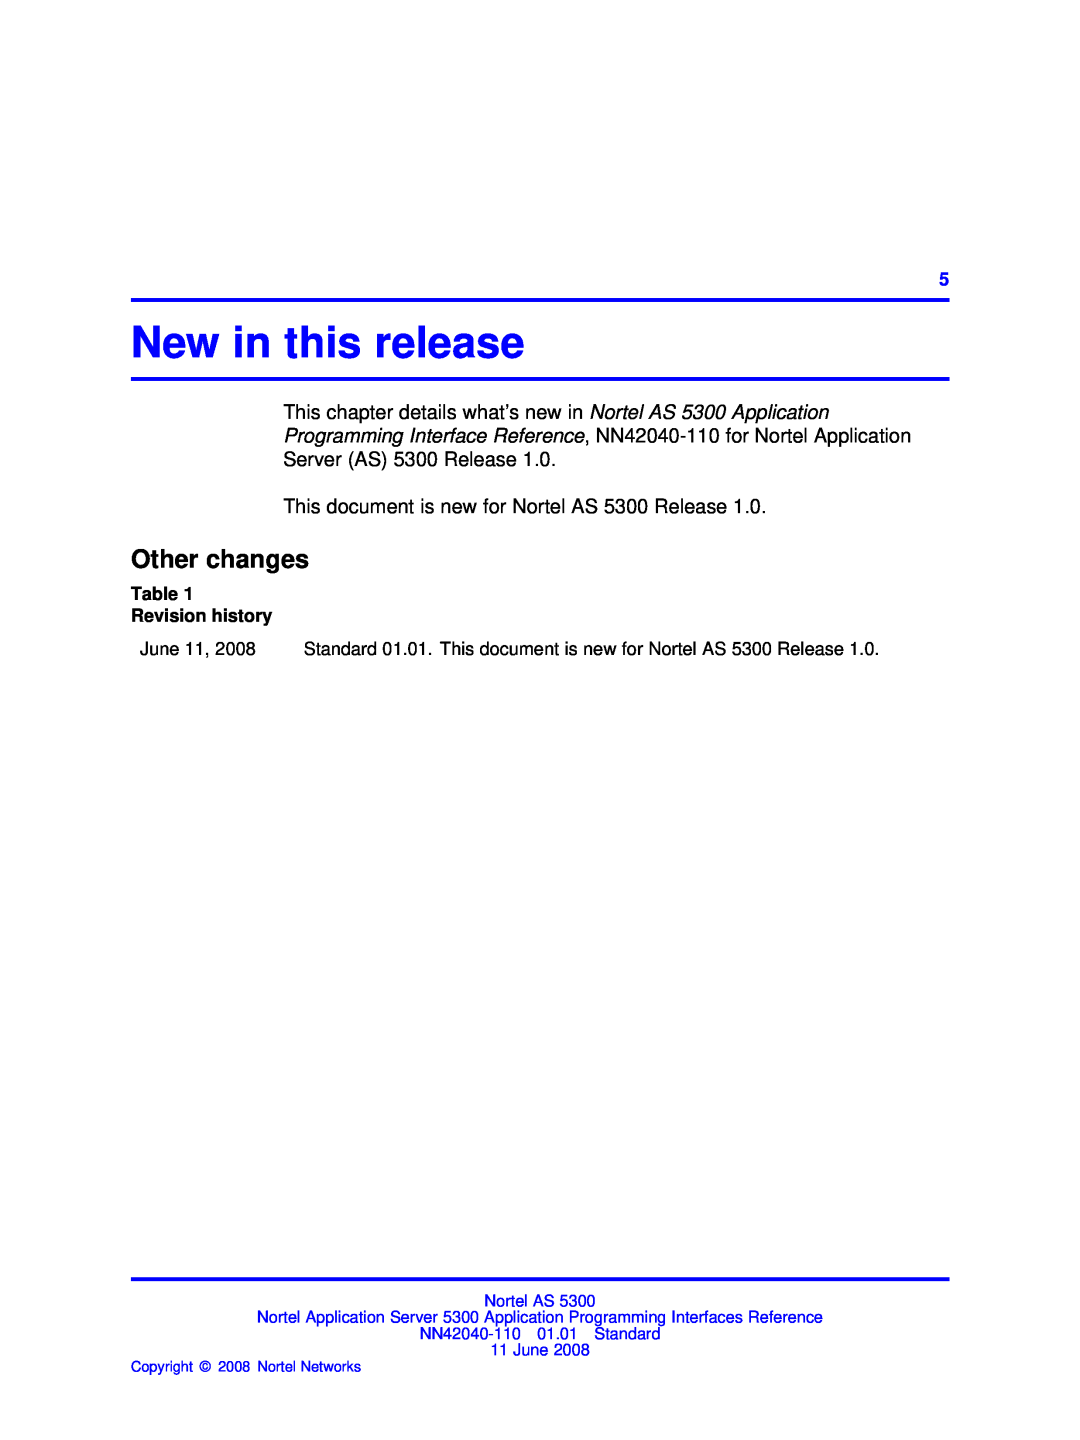 Nortel Networks AS 5300 New in this release, Other changes, Revision history, Nortel AS, Copyright 2008 Nortel Networks 